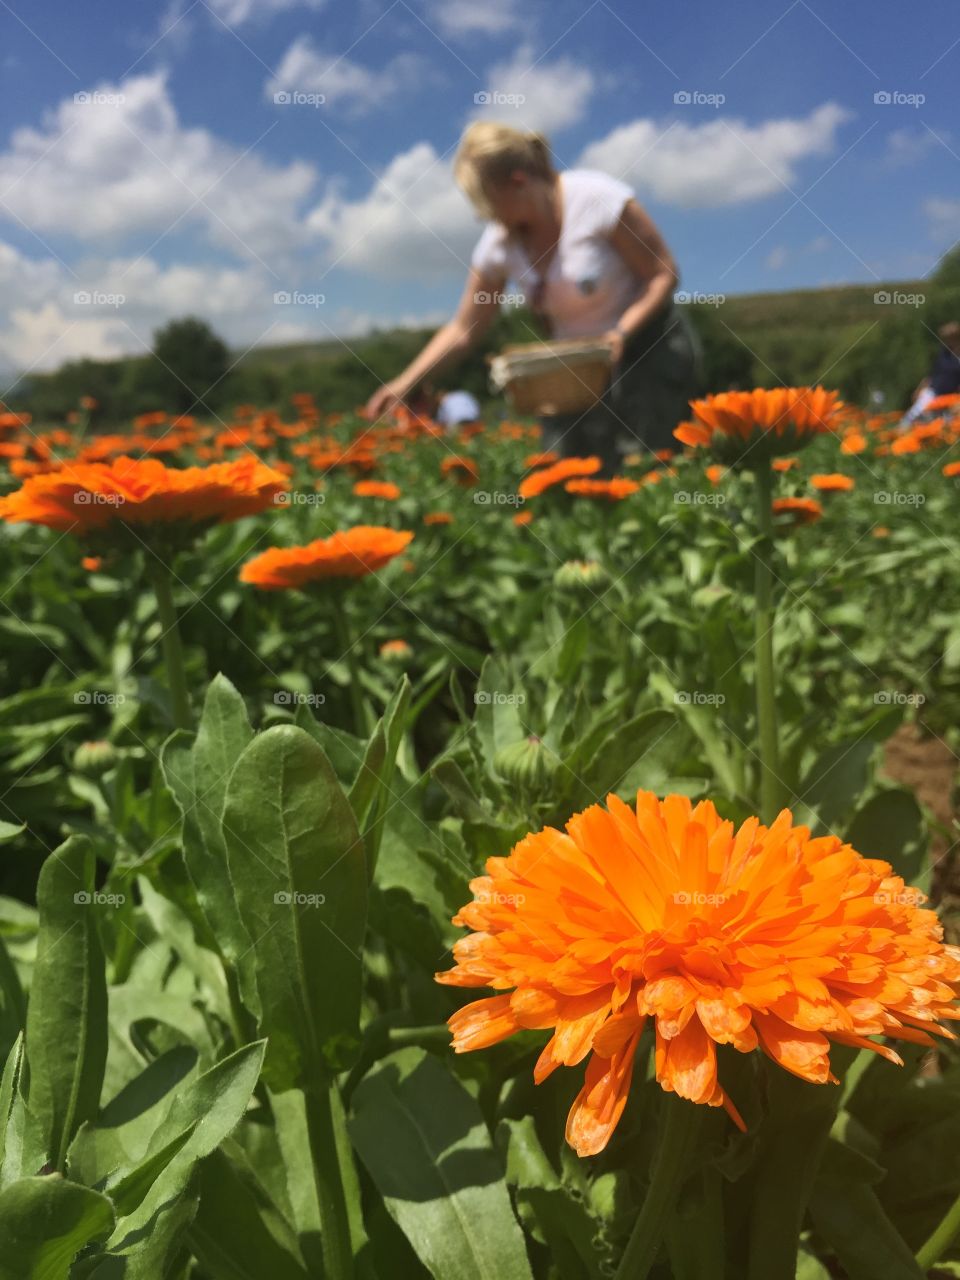 Handy flower woman collecting the calendula flowers